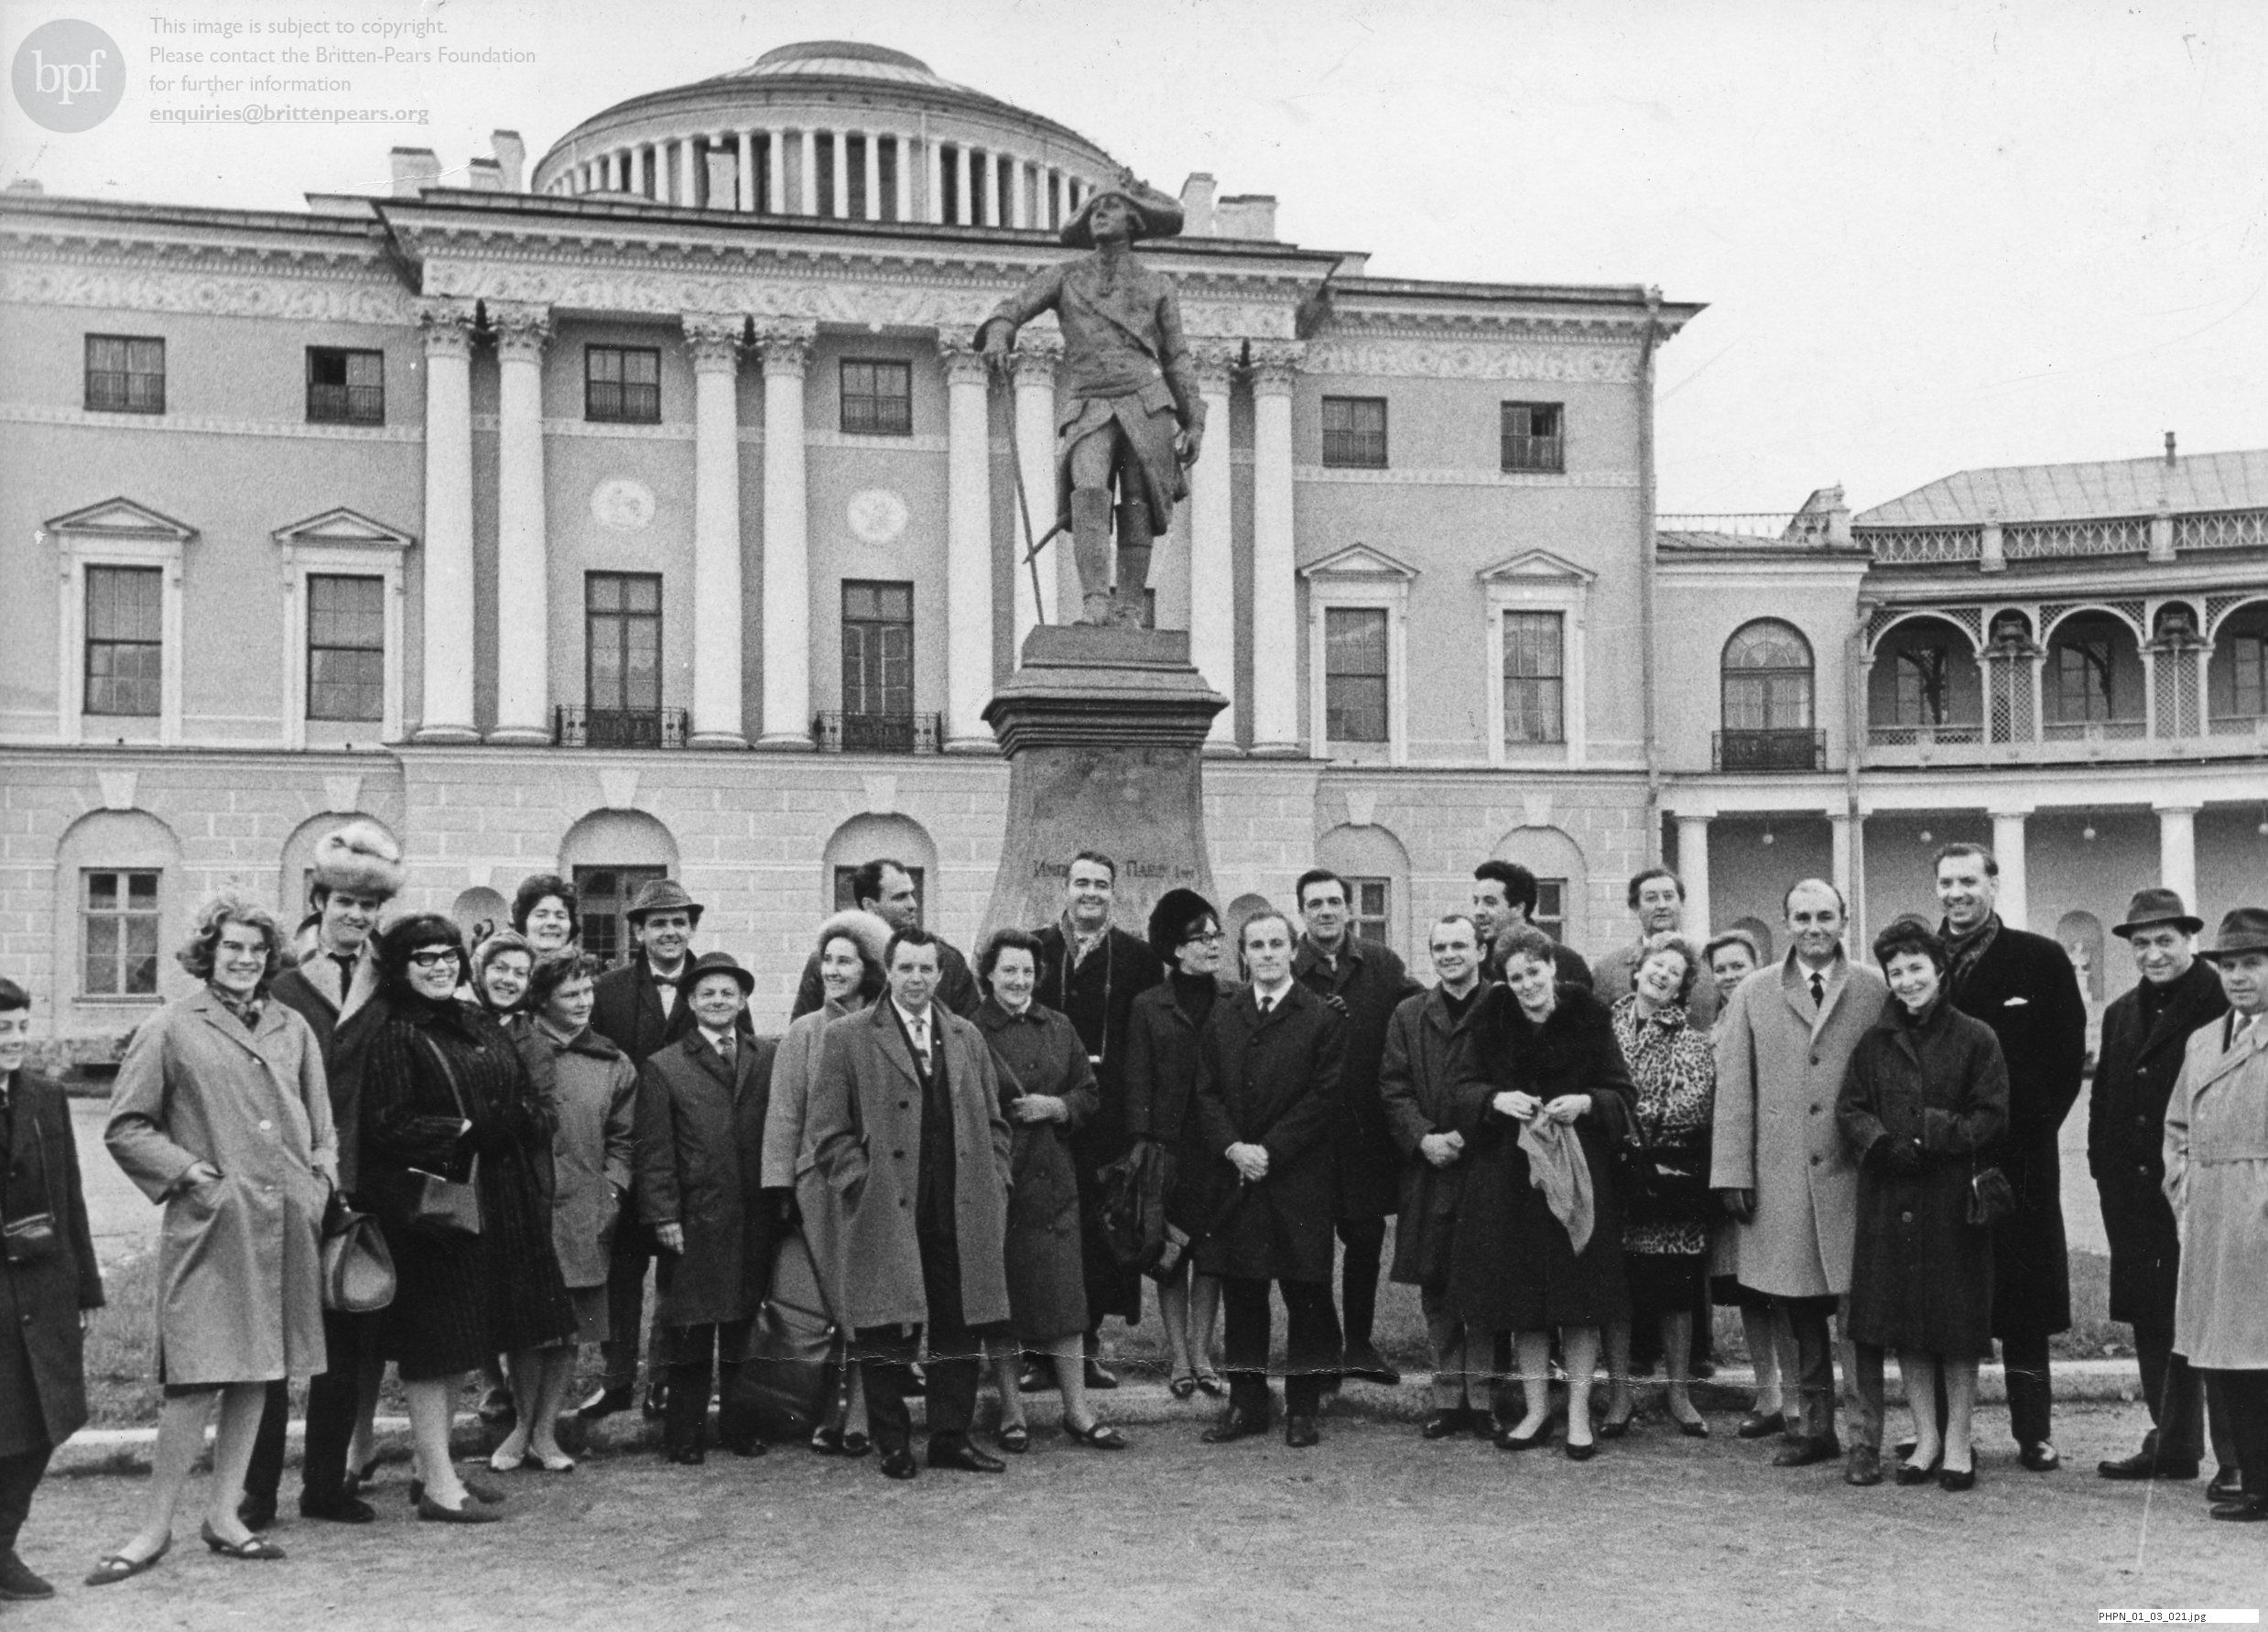 Photograph of the cast of Albert Herring in Russia